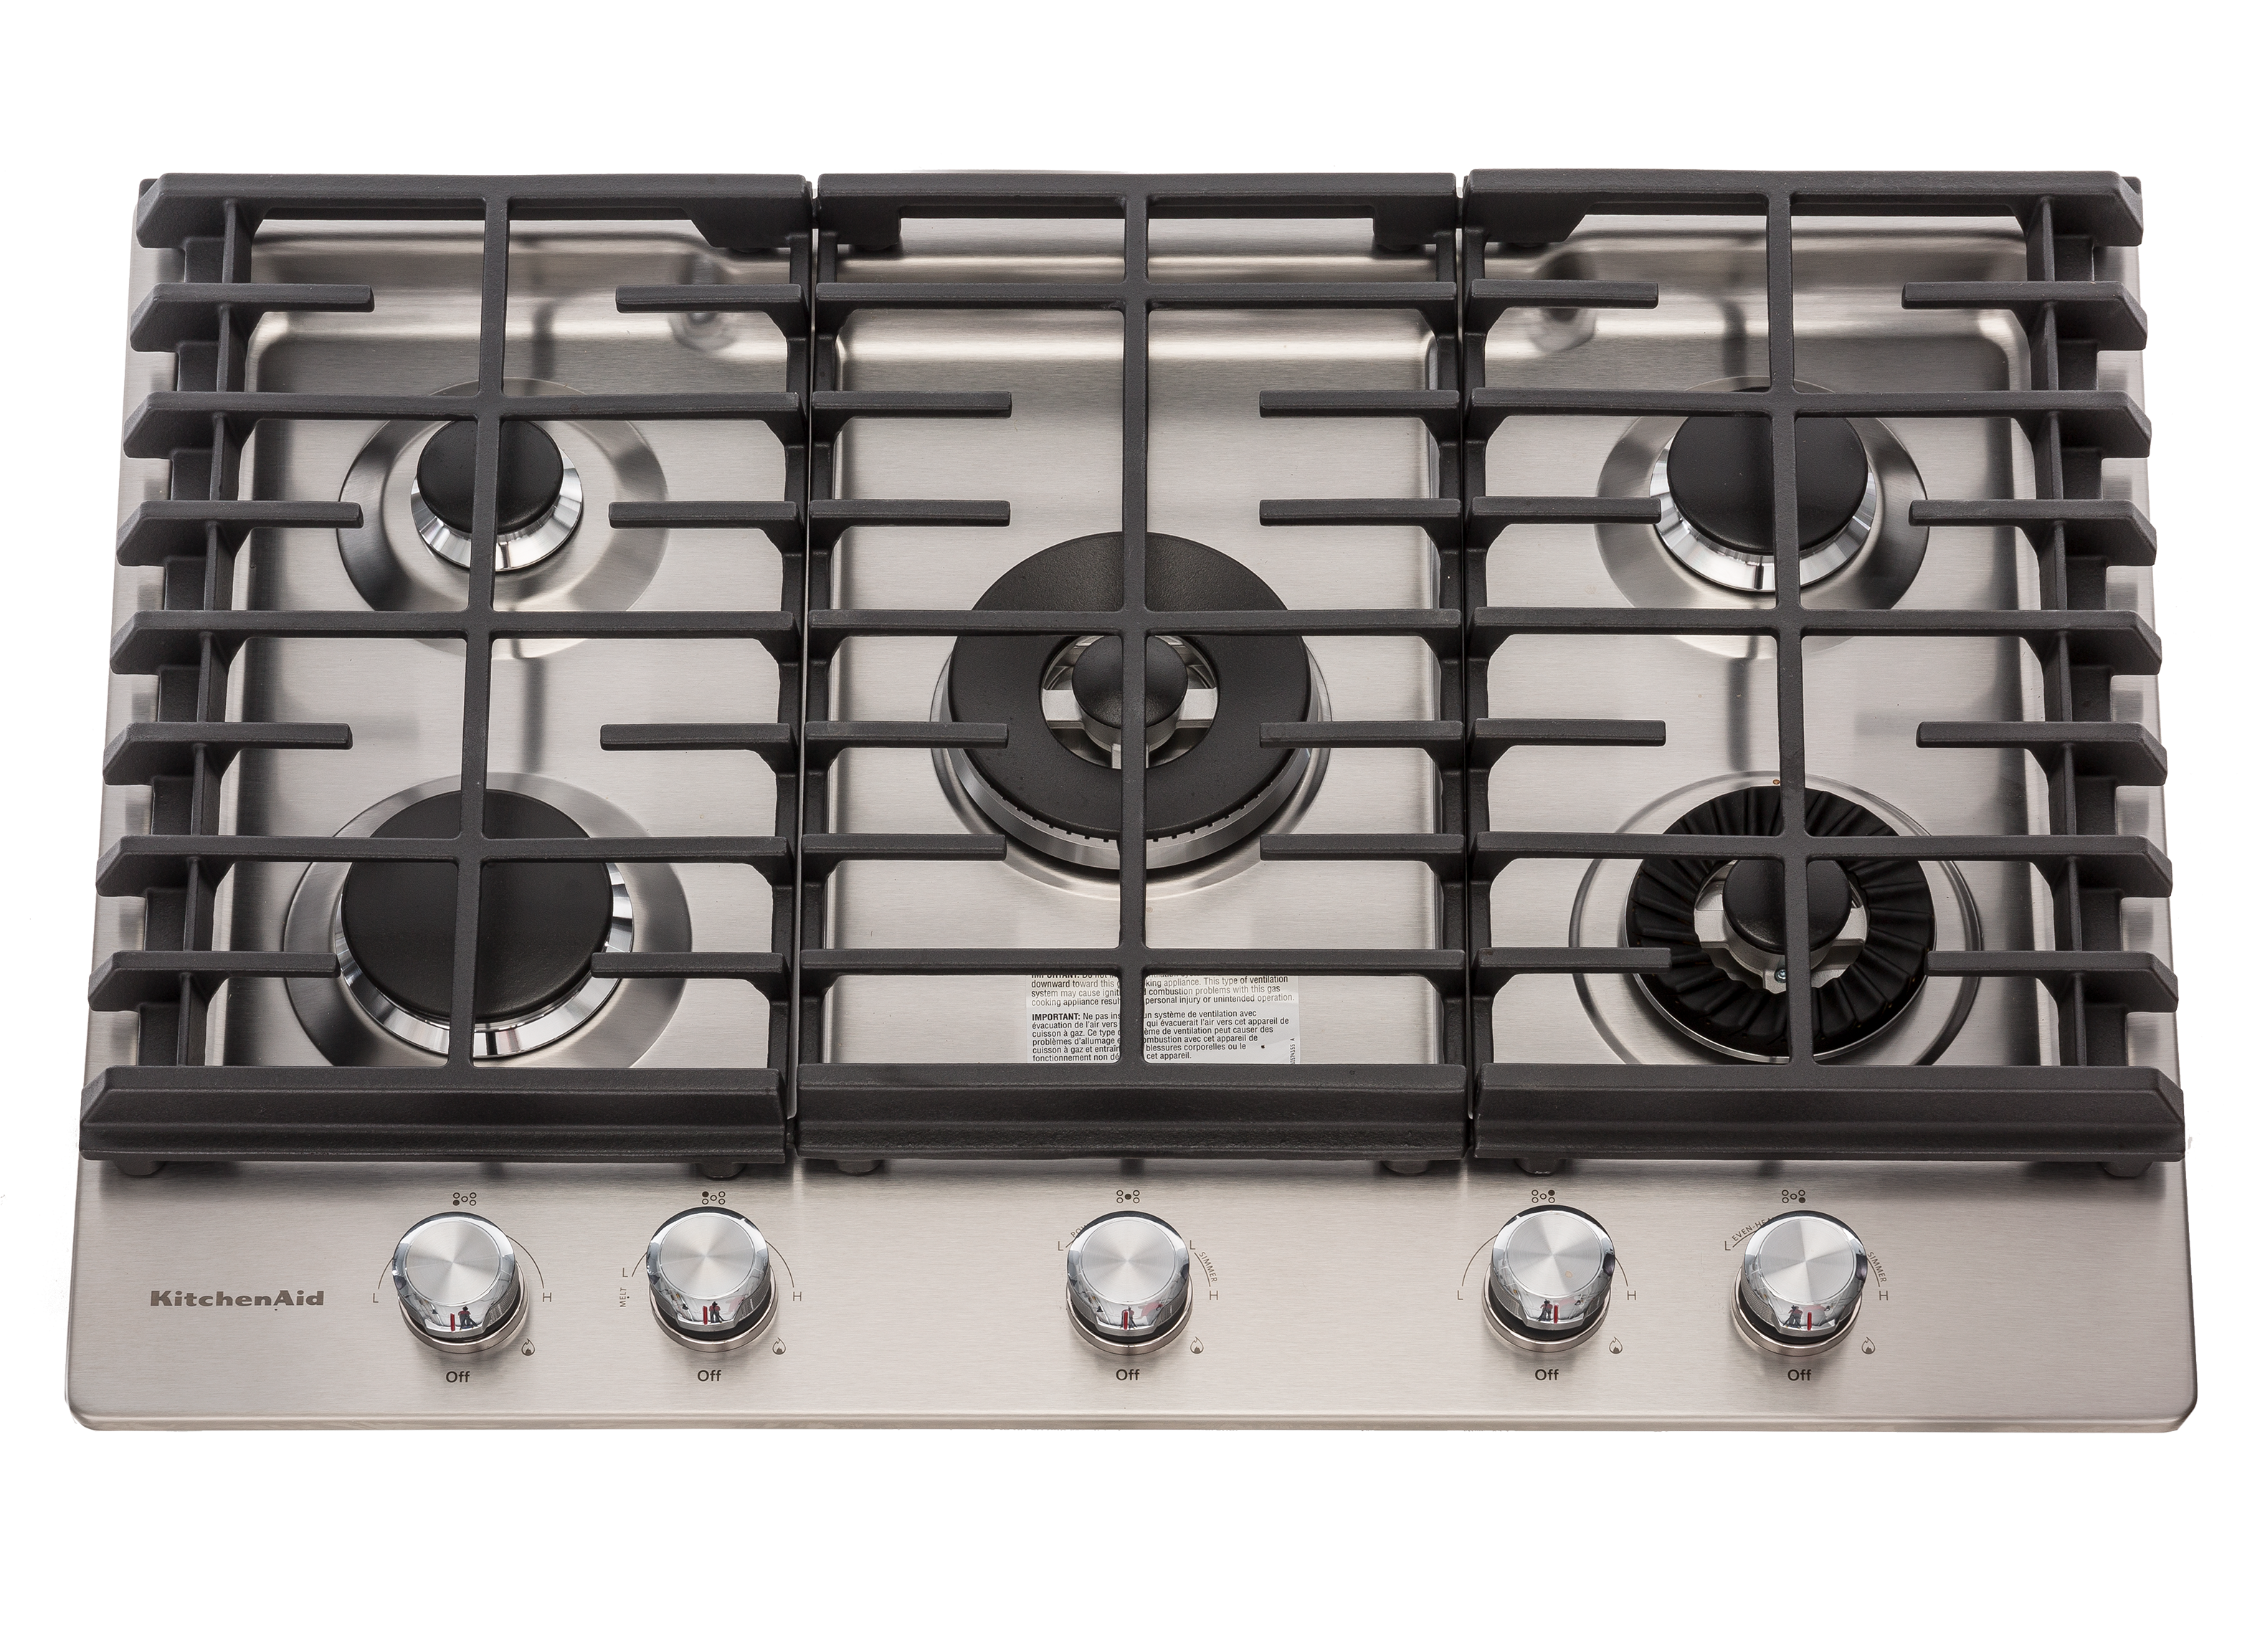 https://crdms.images.consumerreports.org/prod/products/cr/models/398629-30-inch-gas-cooktops-kitchenaid-kcgs950ess-10005867.png